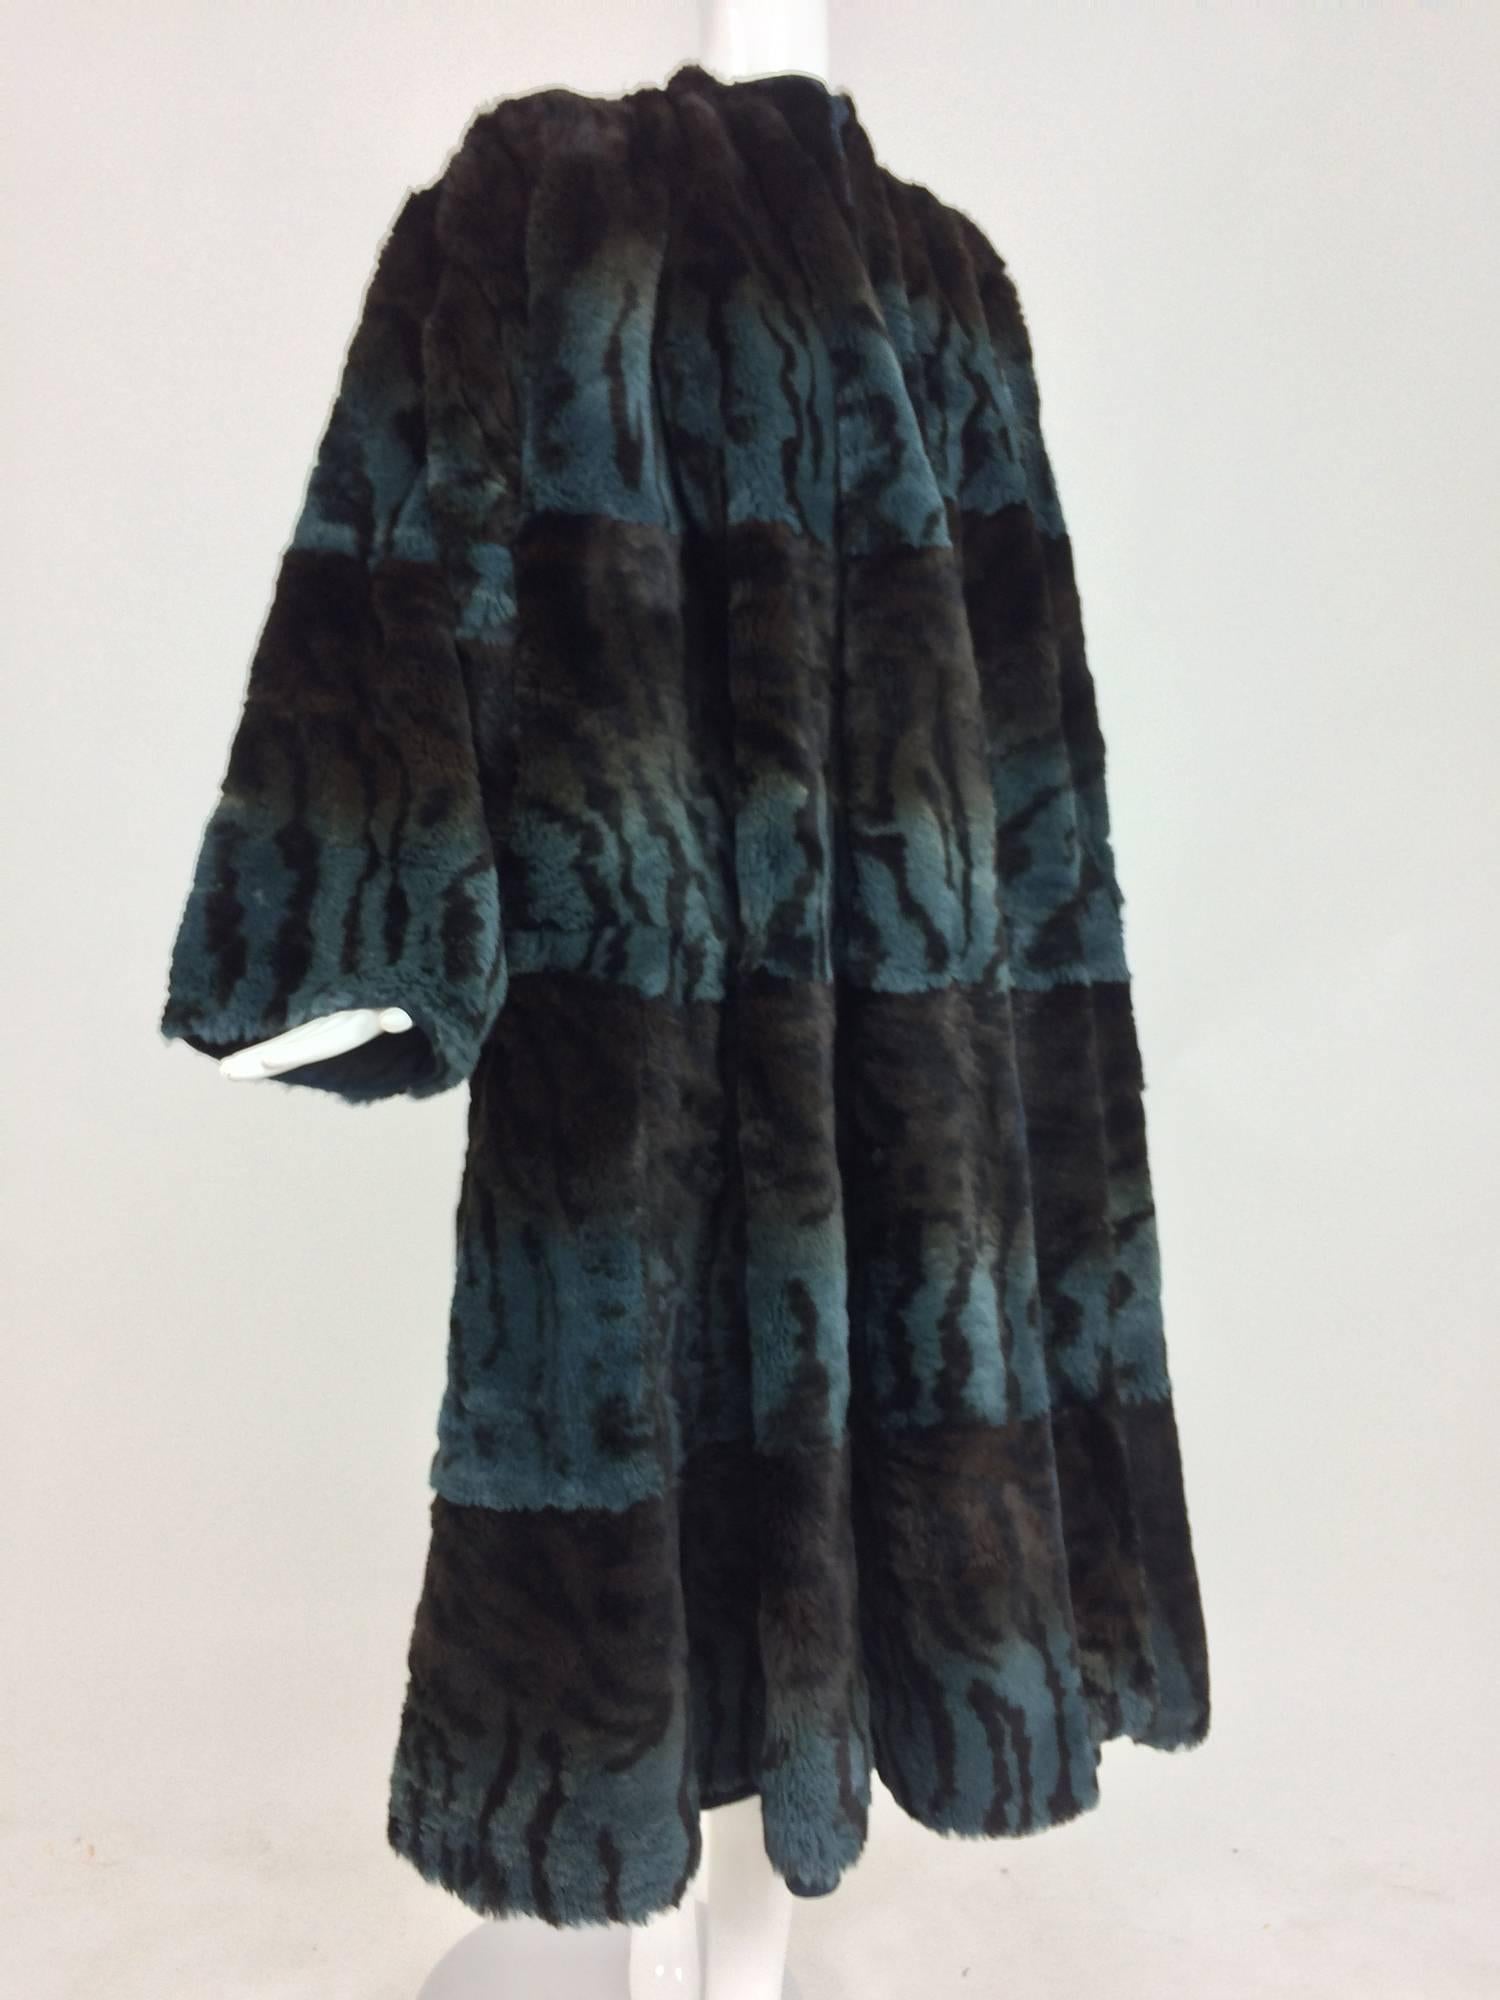 Gerard Babin Paris reversible stenciled tiger stripe lapin fur & black poplin and suede coat 1980s...Swing coat from the 1980s, it is very full from the underarm to the hem...Jewel neckline with long full sleeves...It can be worn with the fur side